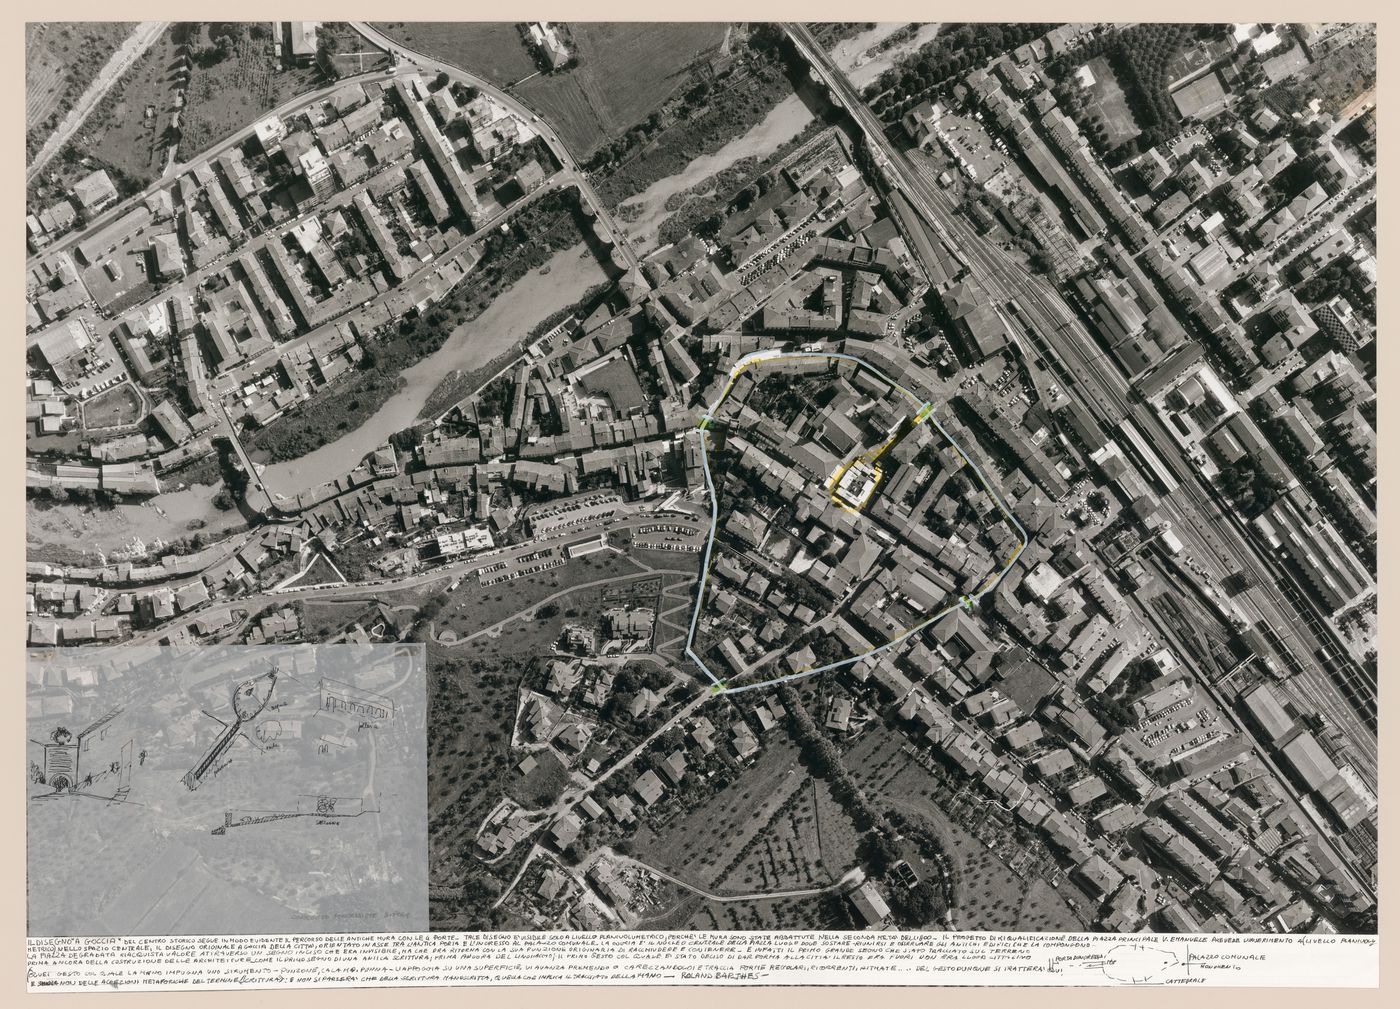 Aerial photograph for Riqualificazione centro Storico di Pontassieve [Redevelopment of the historical center of Pontassieve], Florence, Italy